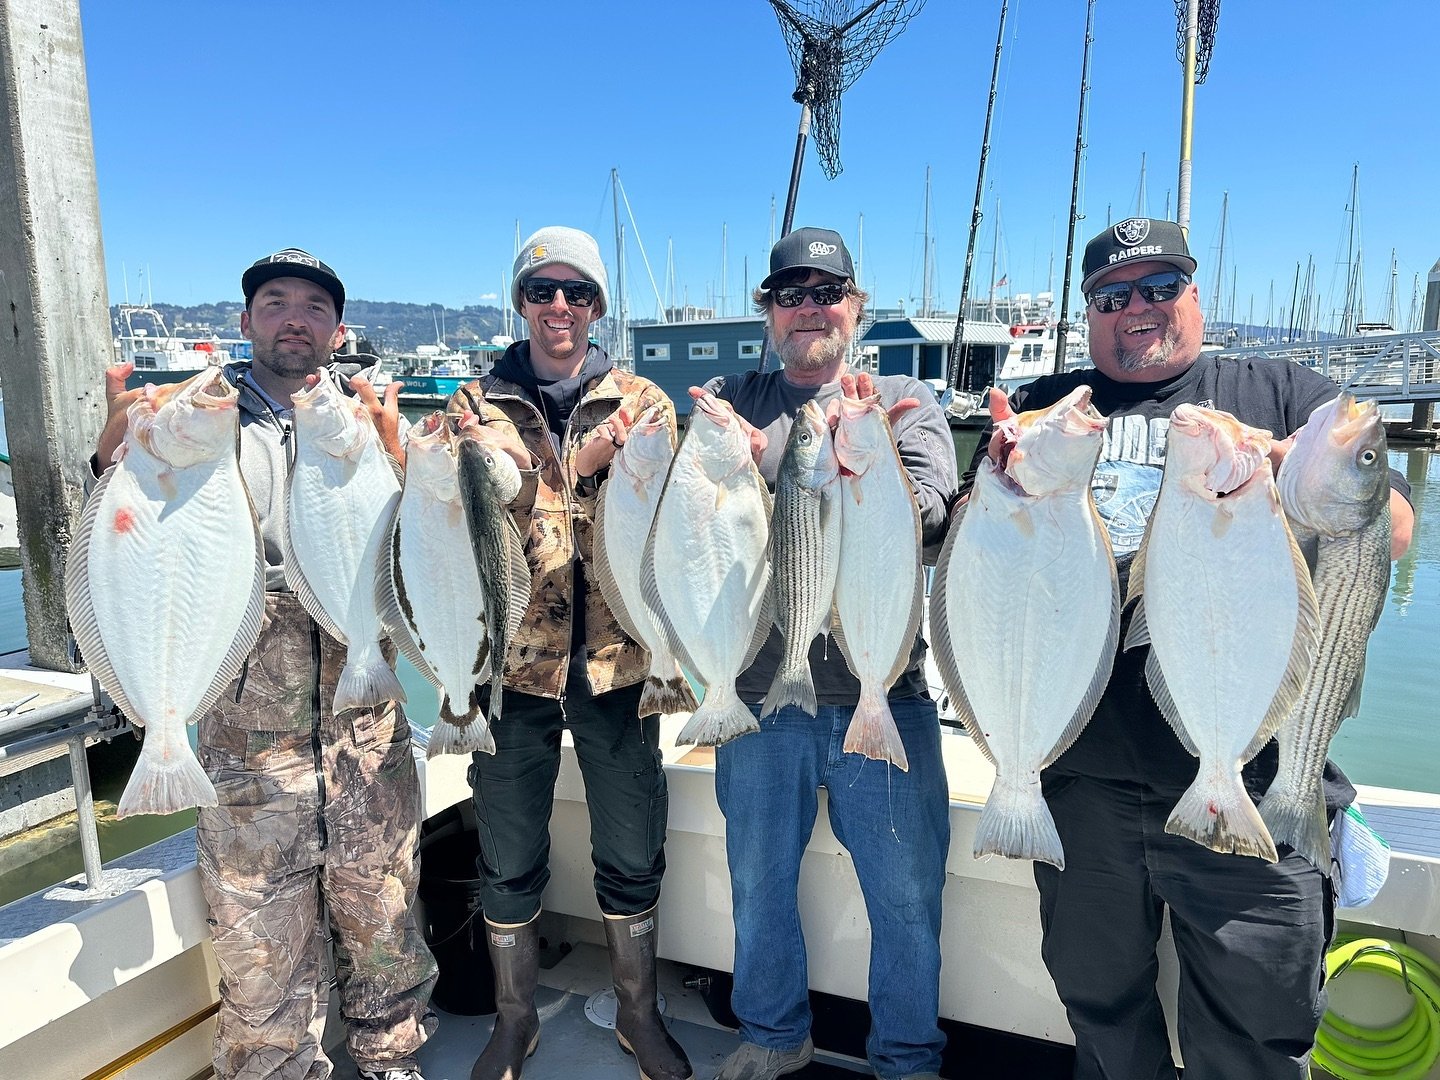 Limits for our crew today #goldenstateguideservice #fishEmeryville #scallywag fishing #fish